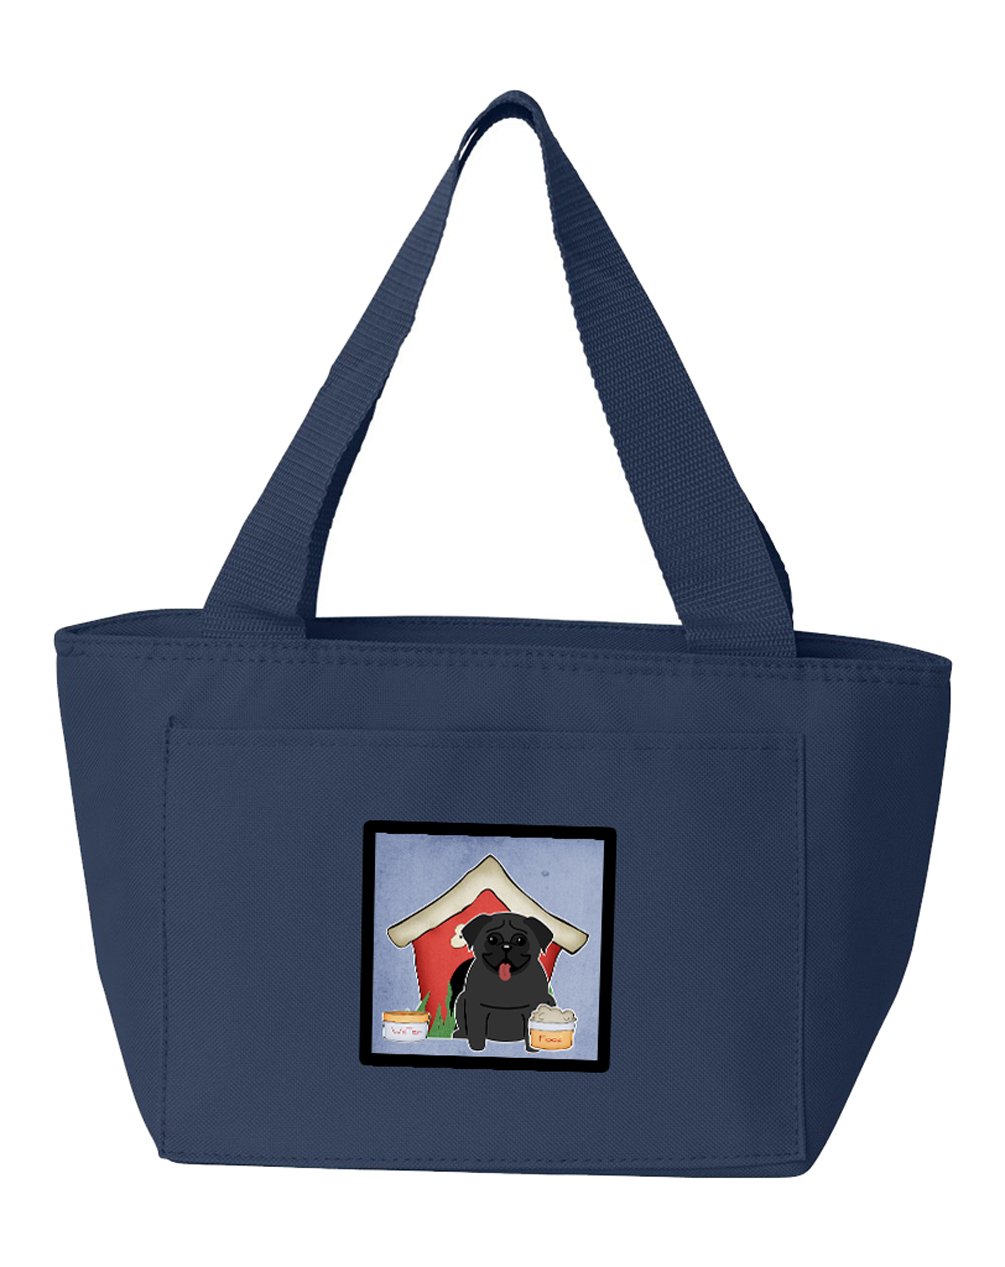 Dog House Collection Pug Black Lunch Bag BB2760NA-8808 by Caroline's Treasures